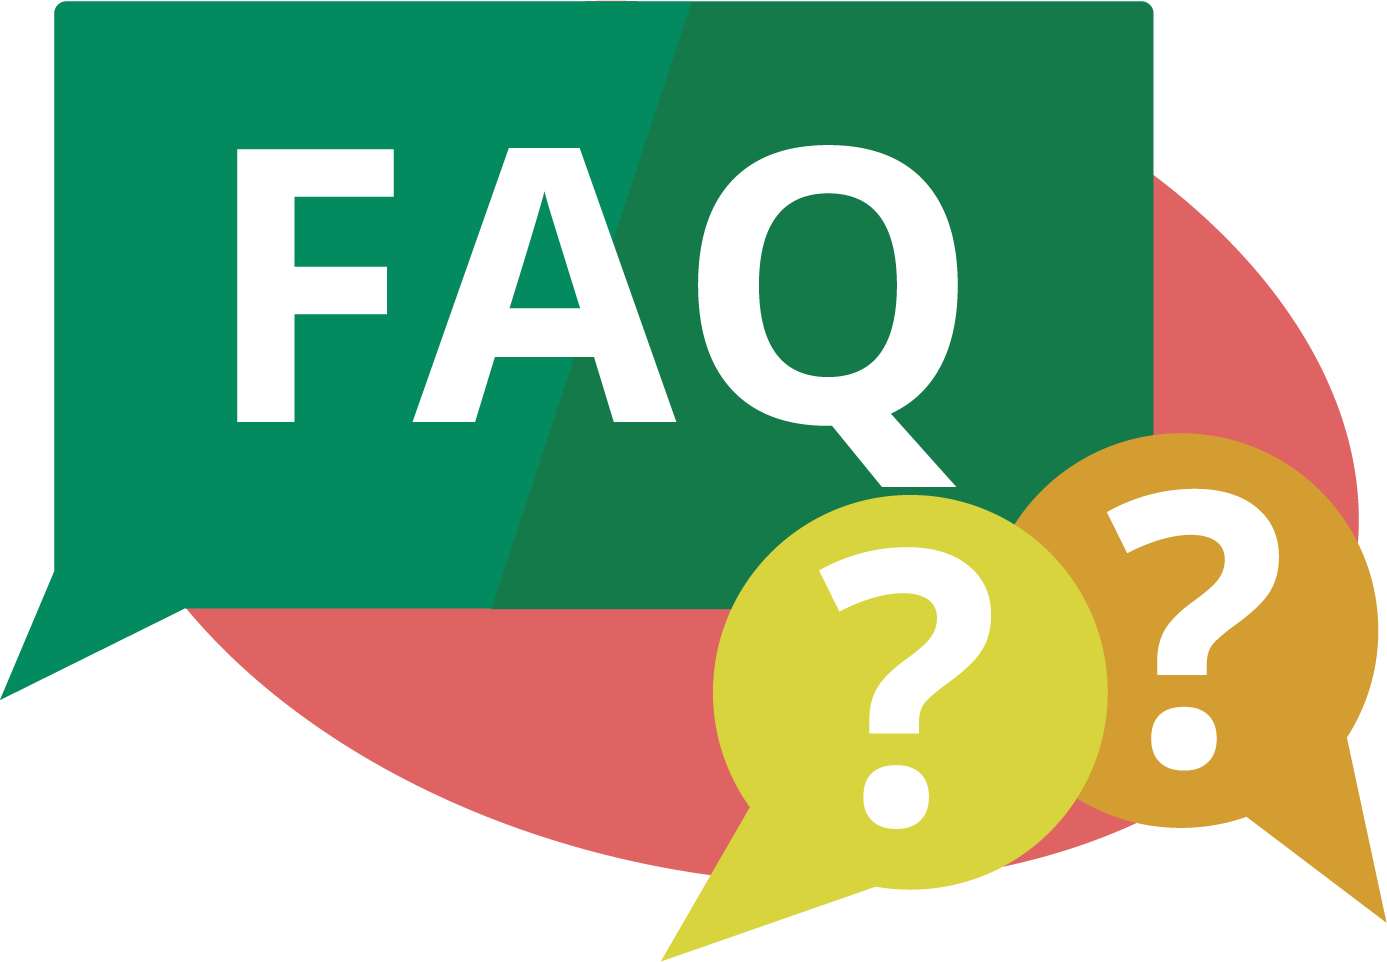 FAQ Frequently Asked Questions PNG Image Transparent Background